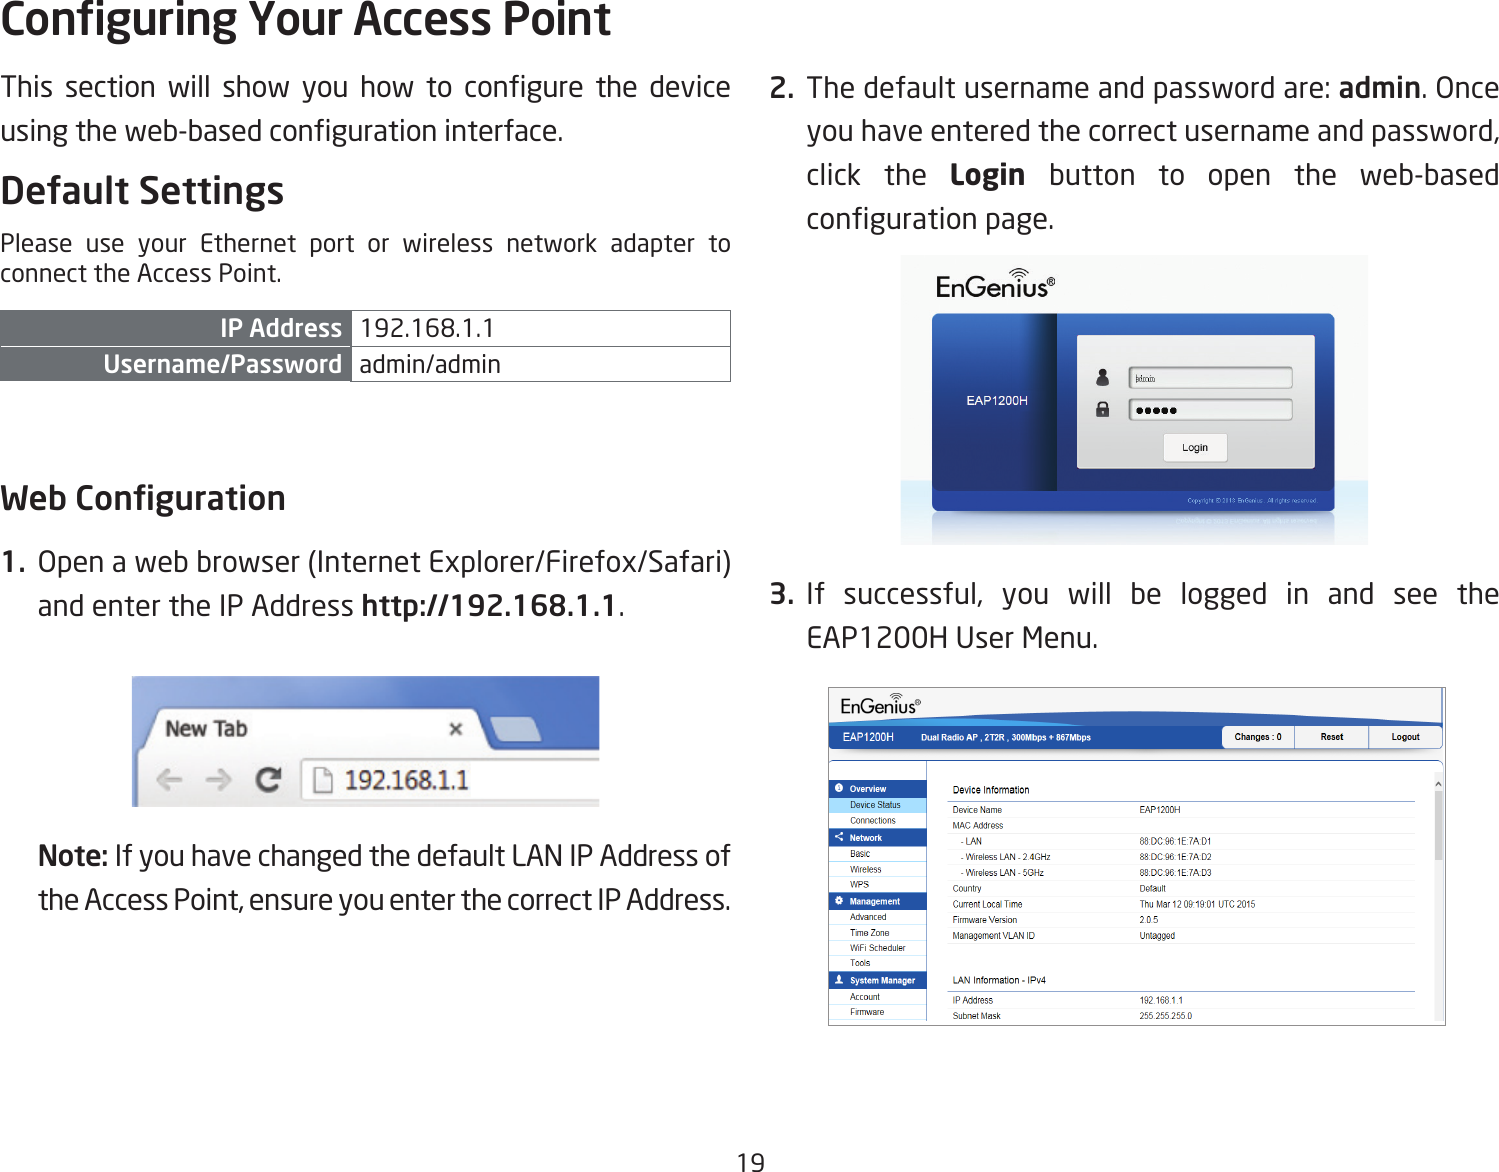 19This section will show you how to congure the deviceusingtheweb-basedcongurationinterface.Default SettingsPlease use your Ethernet port or wireless network adapter to connect the Access Point.IP Address 192.168.1.1Username/Password admin/admin Web Conguration1.  Openawebbrowser(InternetExplorer/Firefox/Safari)and enter the IP Address http://192.168.1.1.Note: If you have changed the default LAN IP Address of theAccessPoint,ensureyouenterthecorrectIPAddress.2. Thedefaultusernameandpasswordare:admin. Once youhaveenteredthecorrectusernameandpassword,click the Login  button to open the web-based congurationpage.3. If successful, you will be logged in and see theEAP1200H User Menu.Conguring Your Access Point